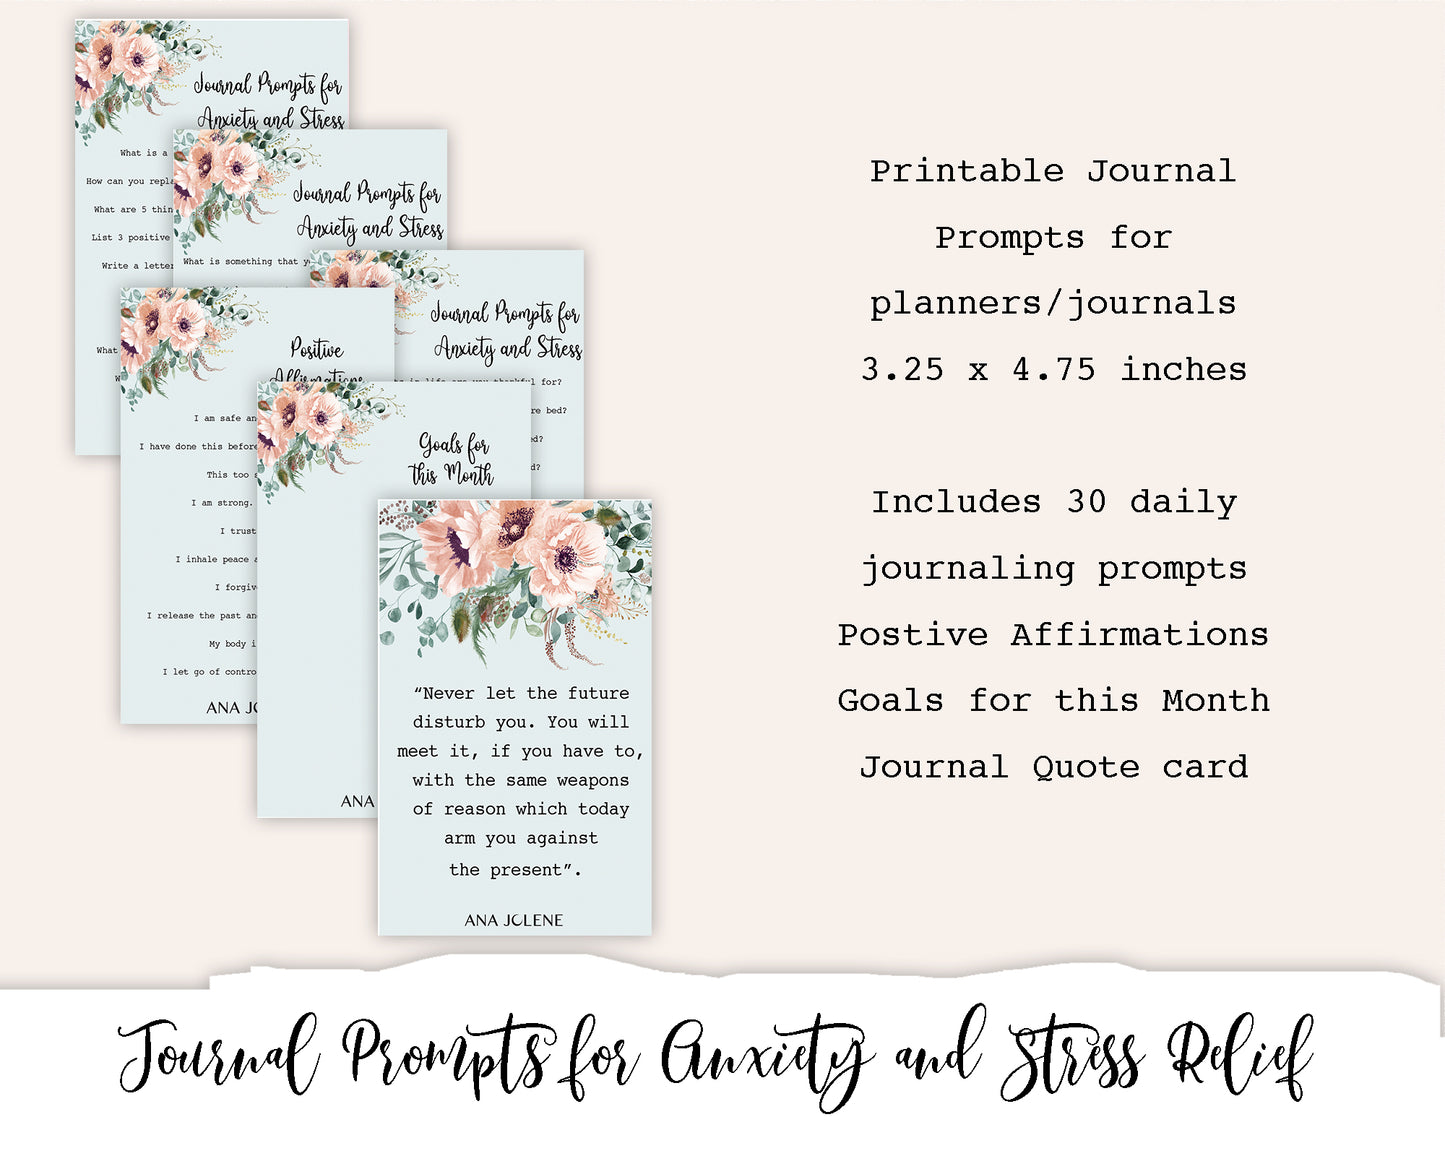 Journal Prompts for Anxiety and Stress Relief Printable